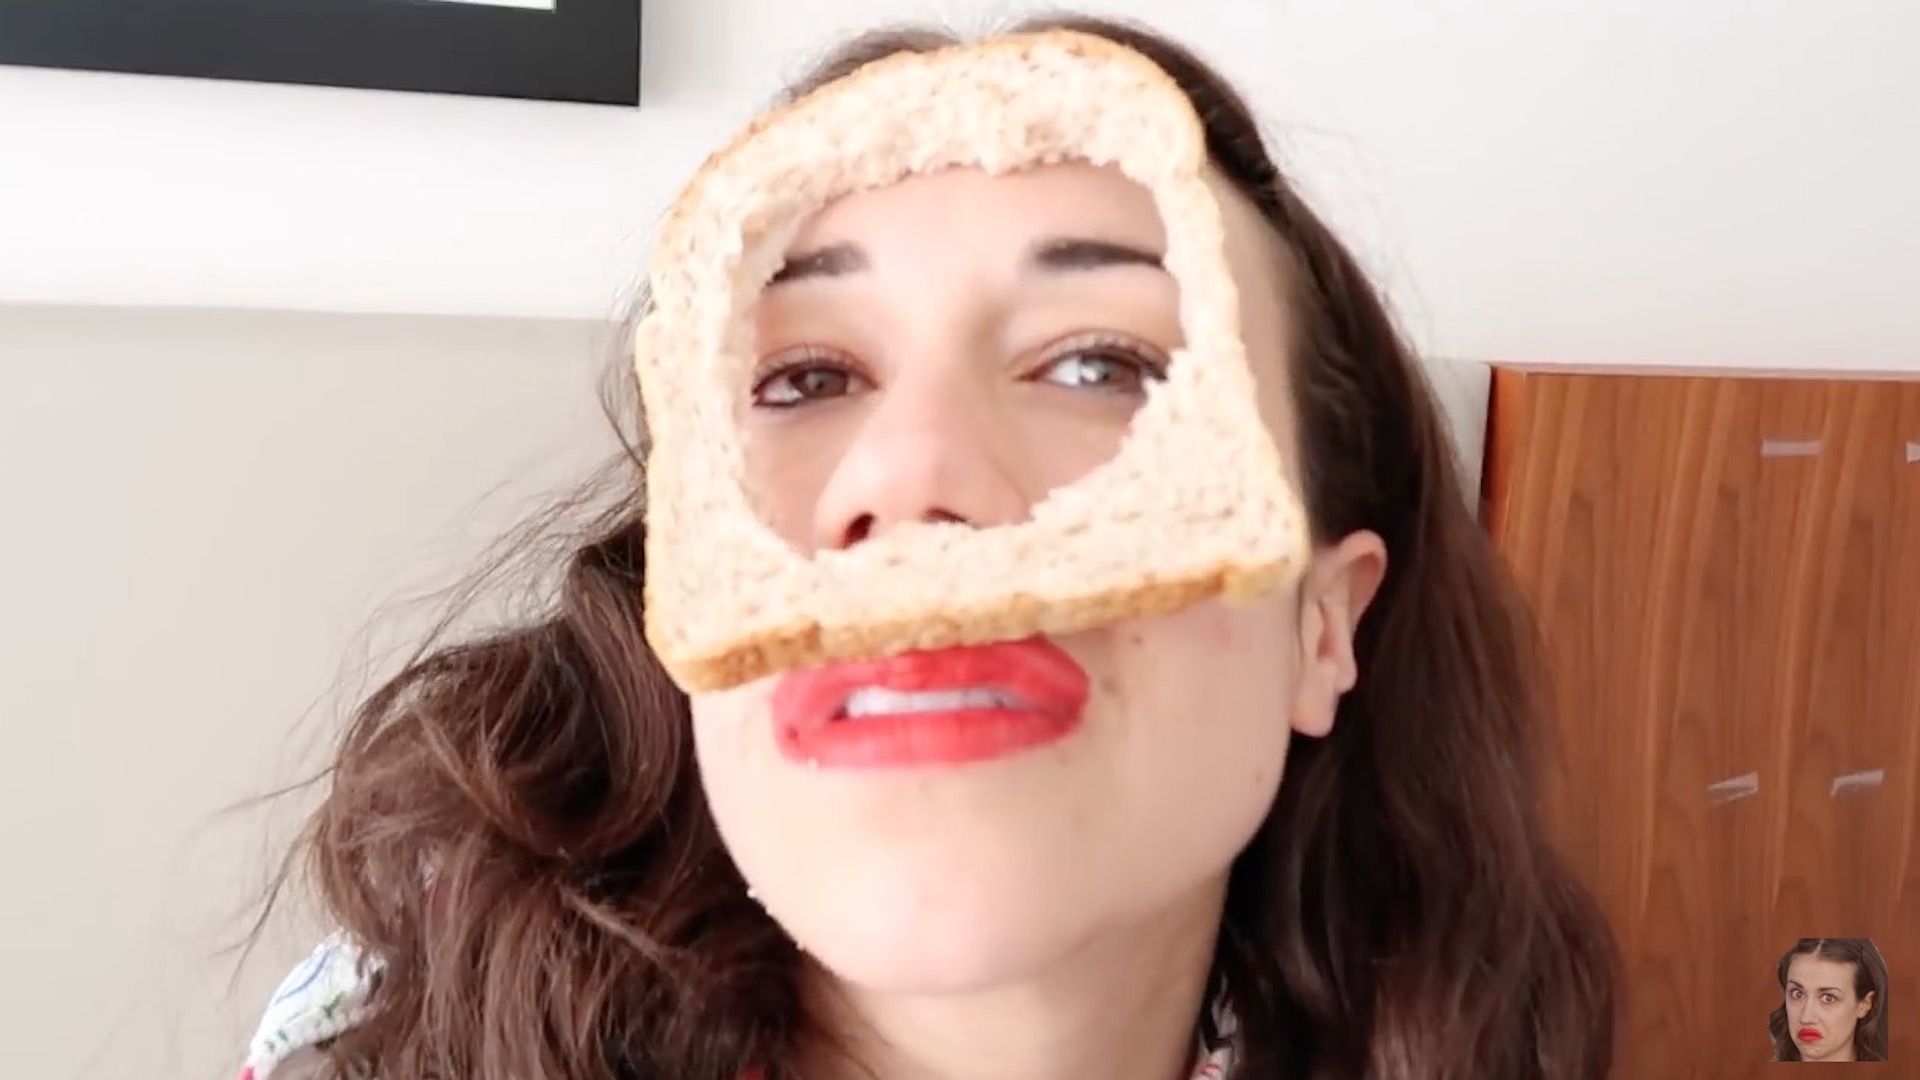 Miranda Sings with a slice of bread on her face